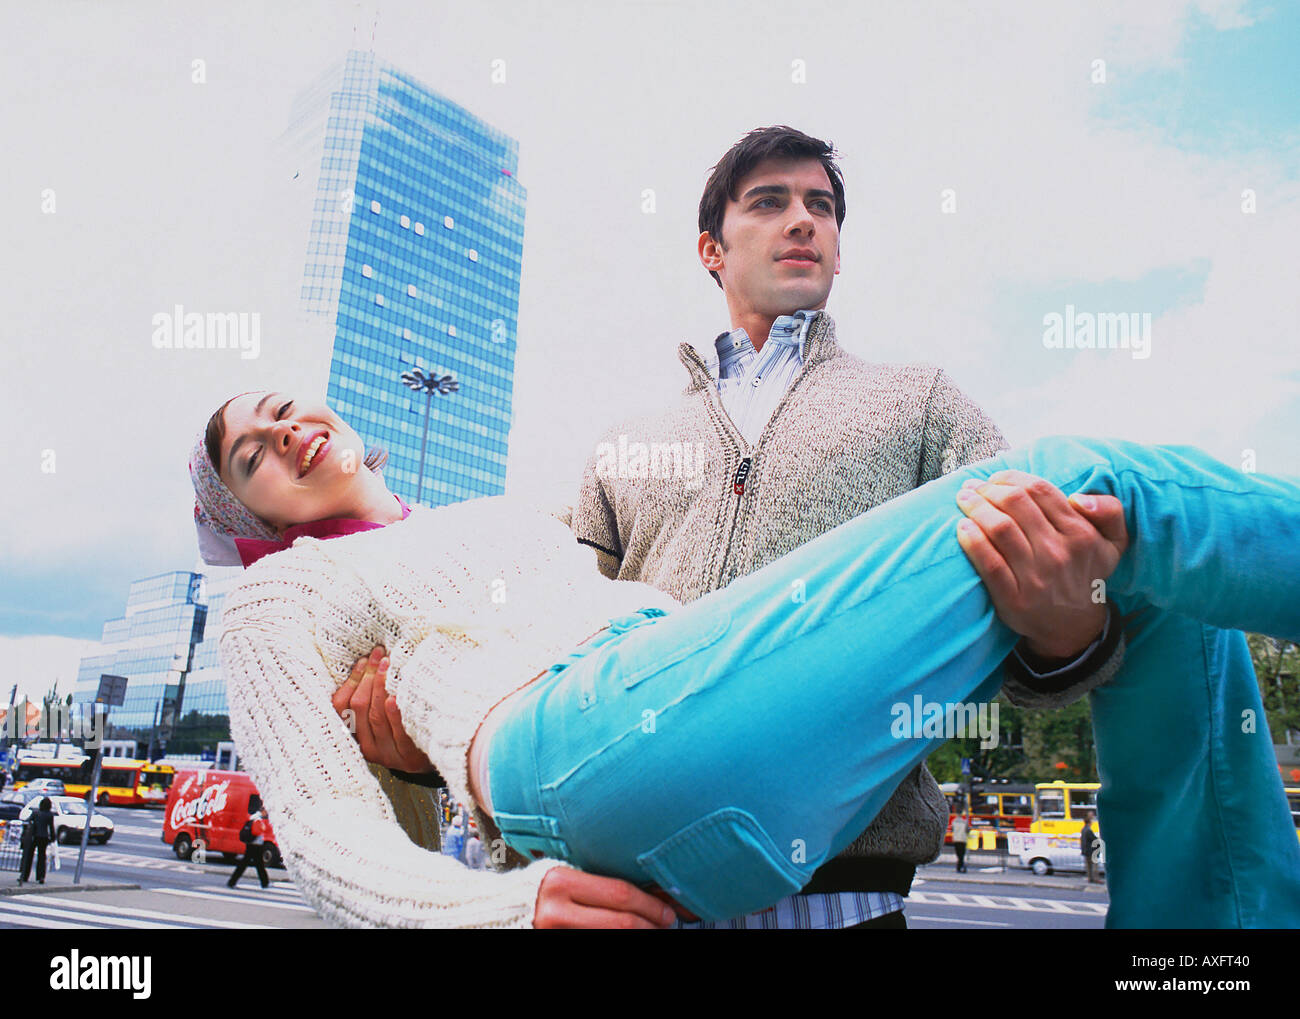 outdoor day spring city street office building buildings skyscraper couple man young woman girl 20 25 dark haired bandana sca Stock Photo